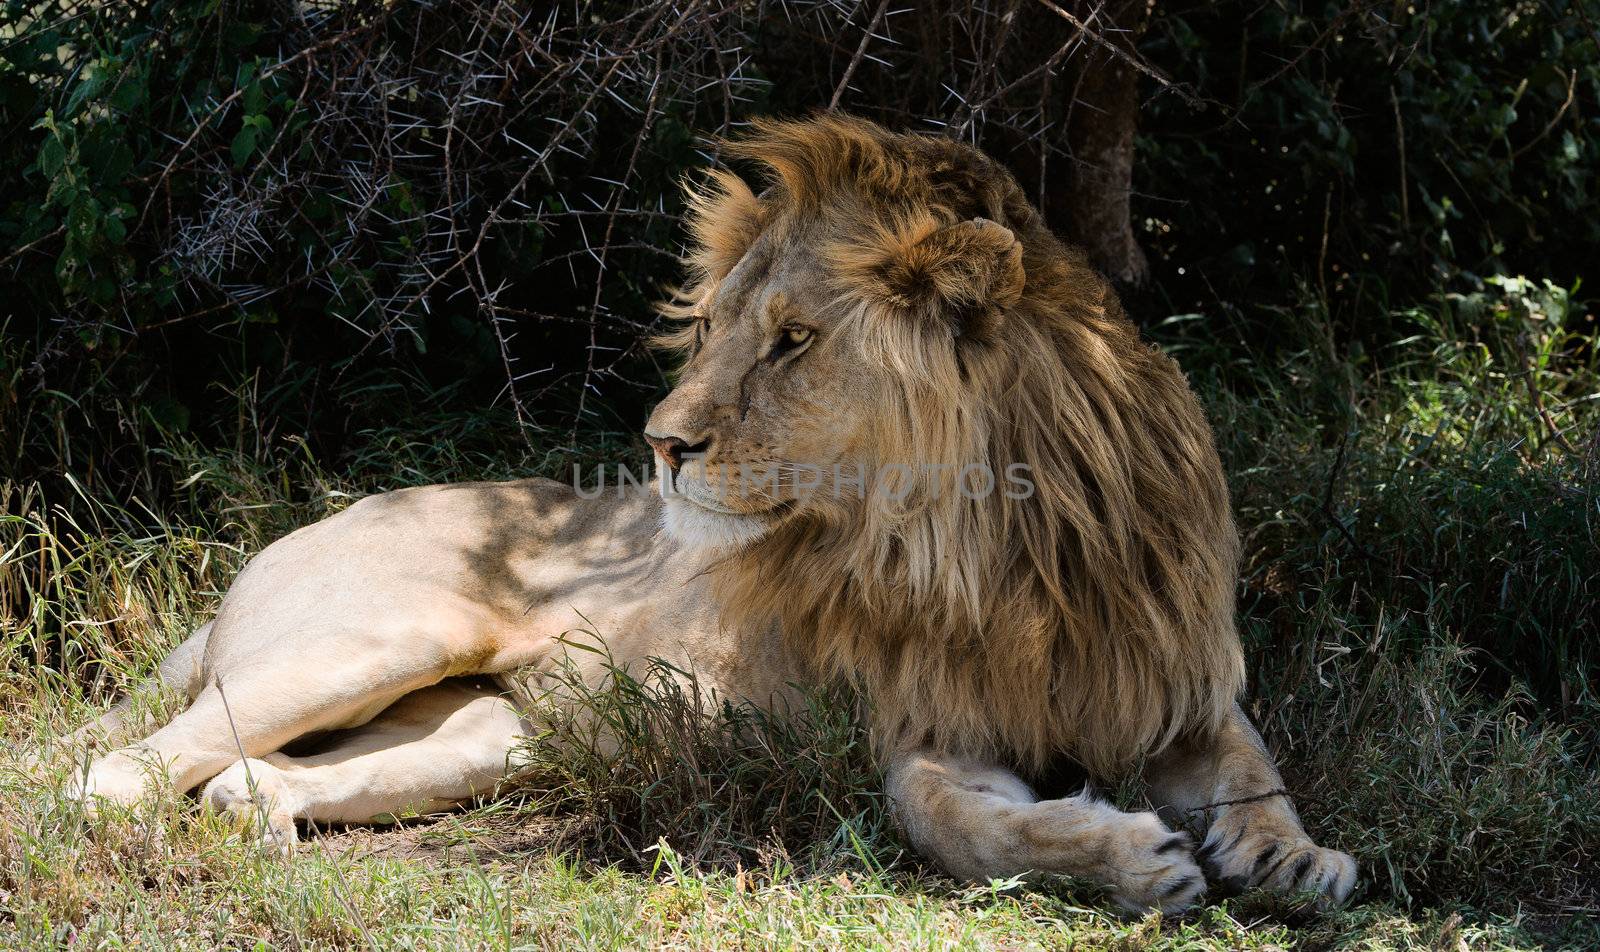 Lion having a rest in a tree shade.Zambia. Africa.